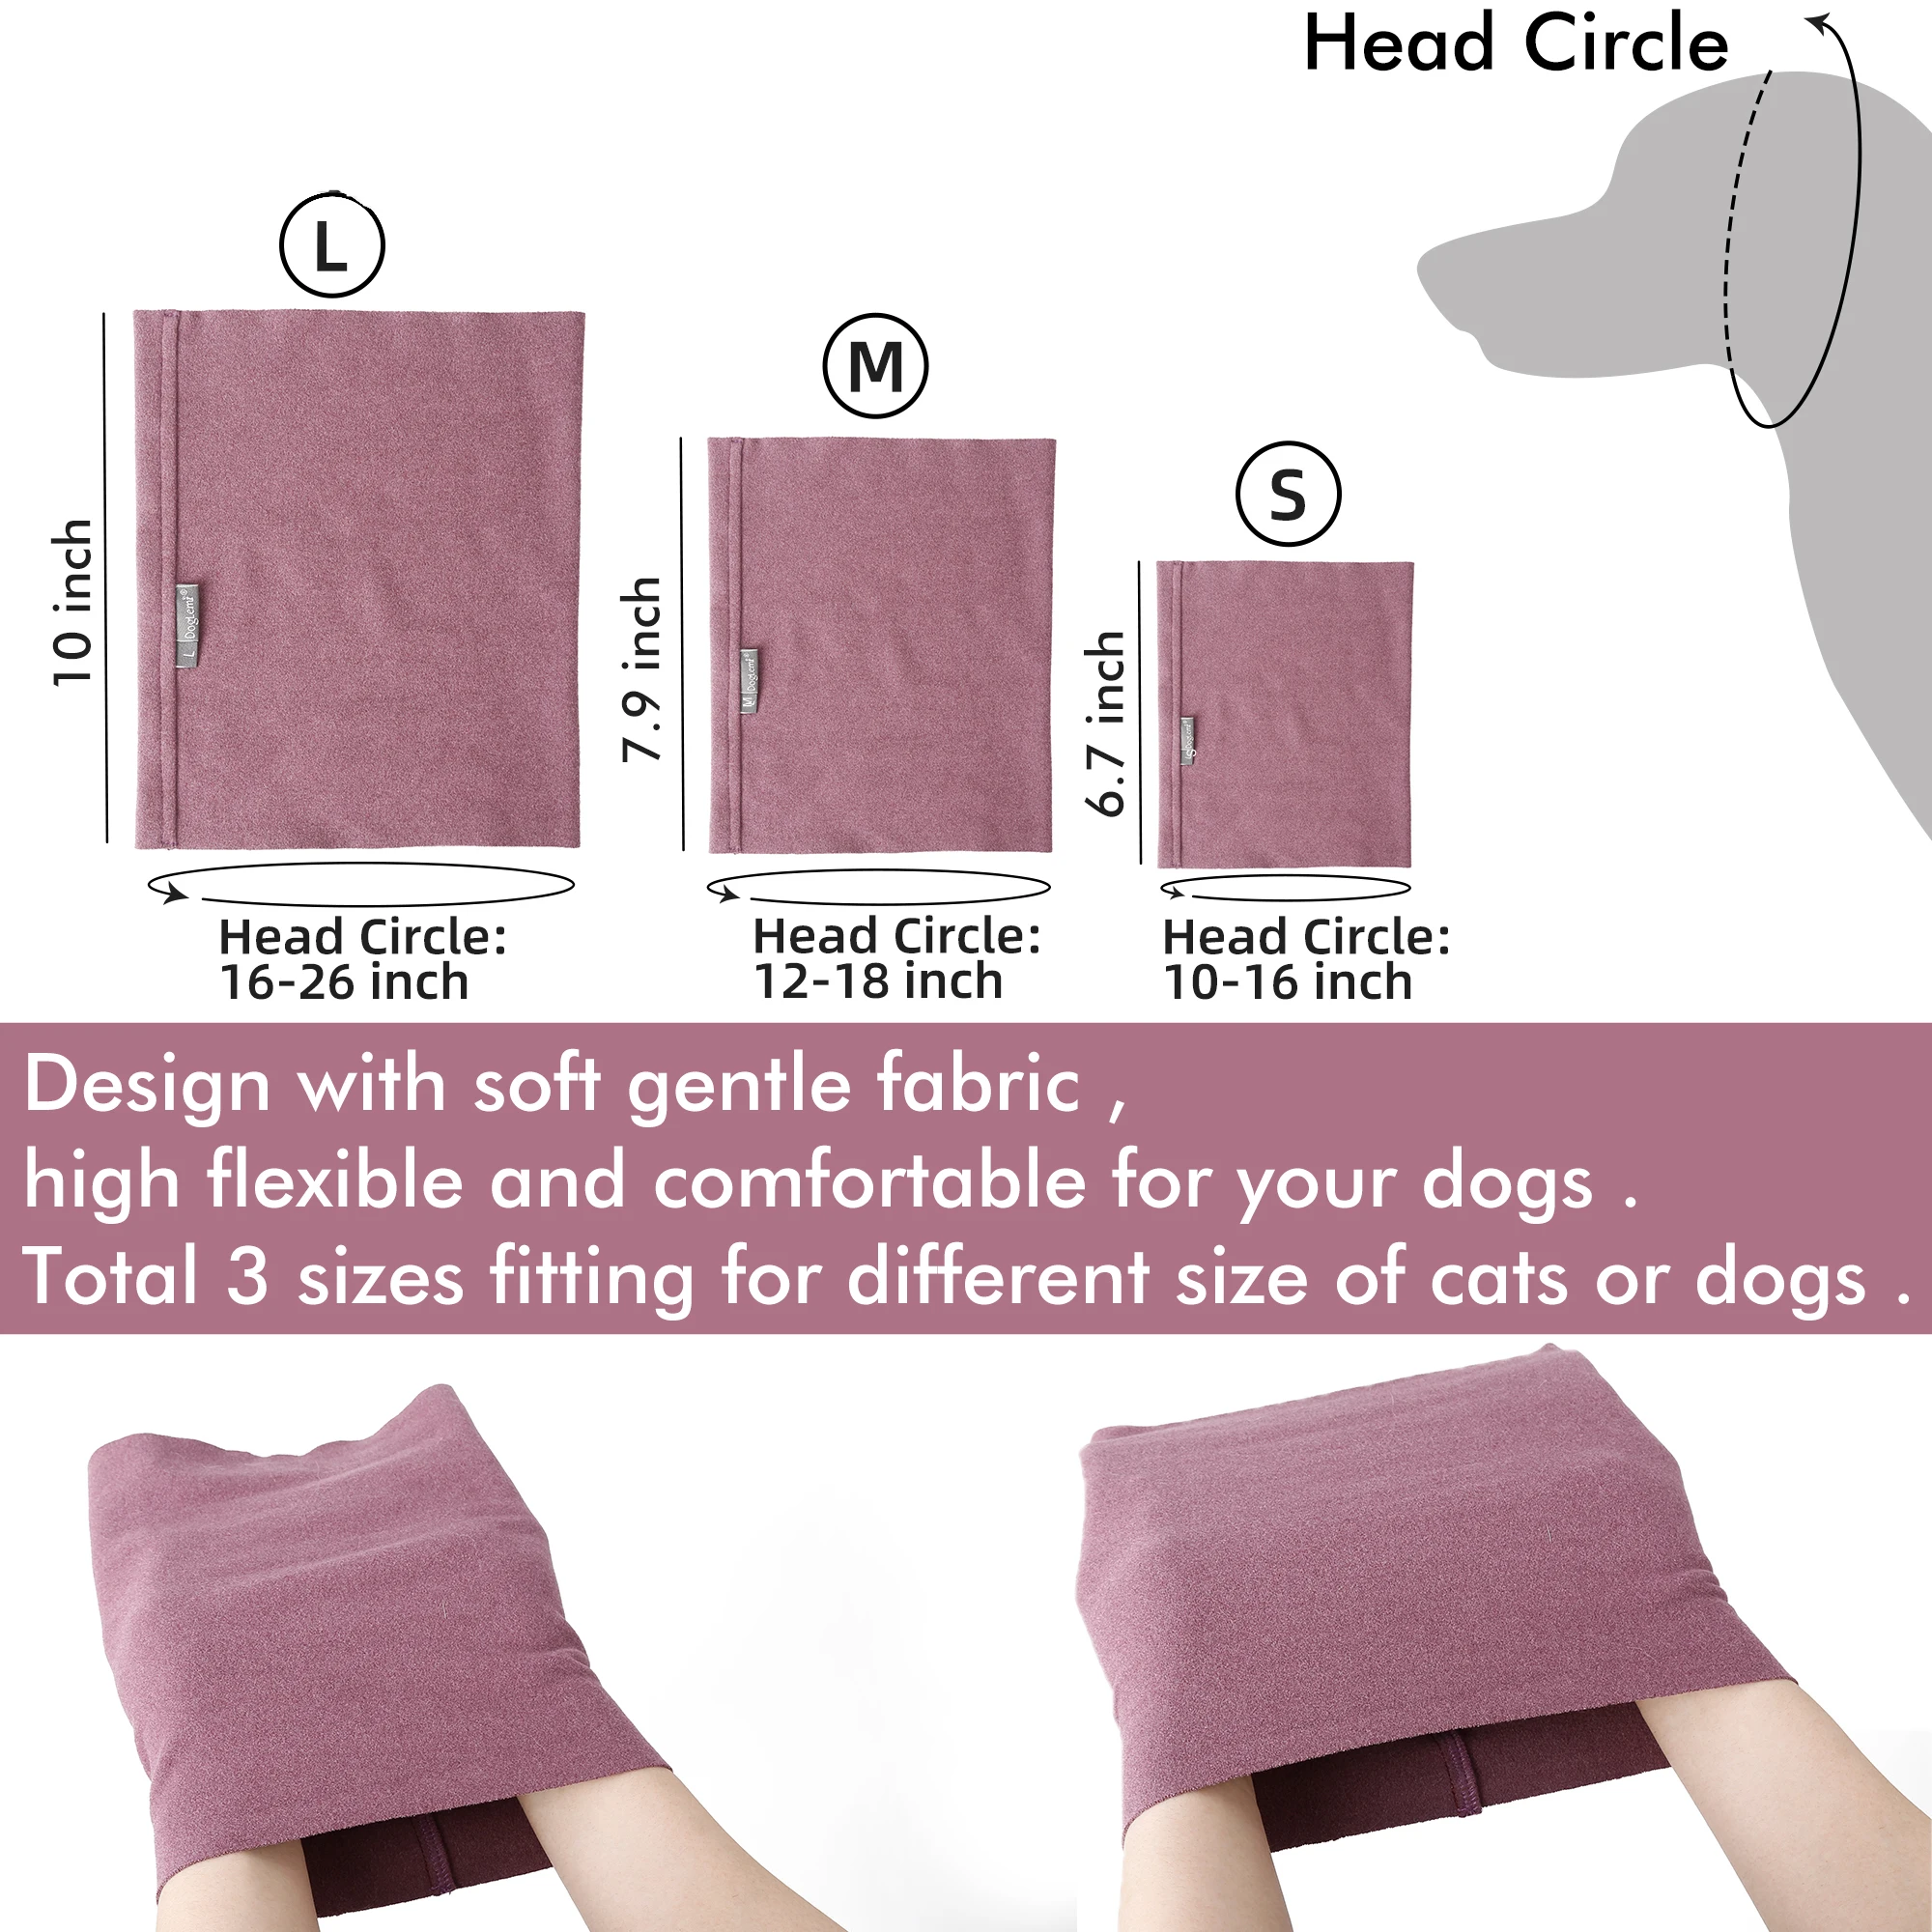 

Calming Dog Ears Cover Pet Cat Hoodie Grooming and Force Drying Head Sleeve for Anxiety Relief and Noise